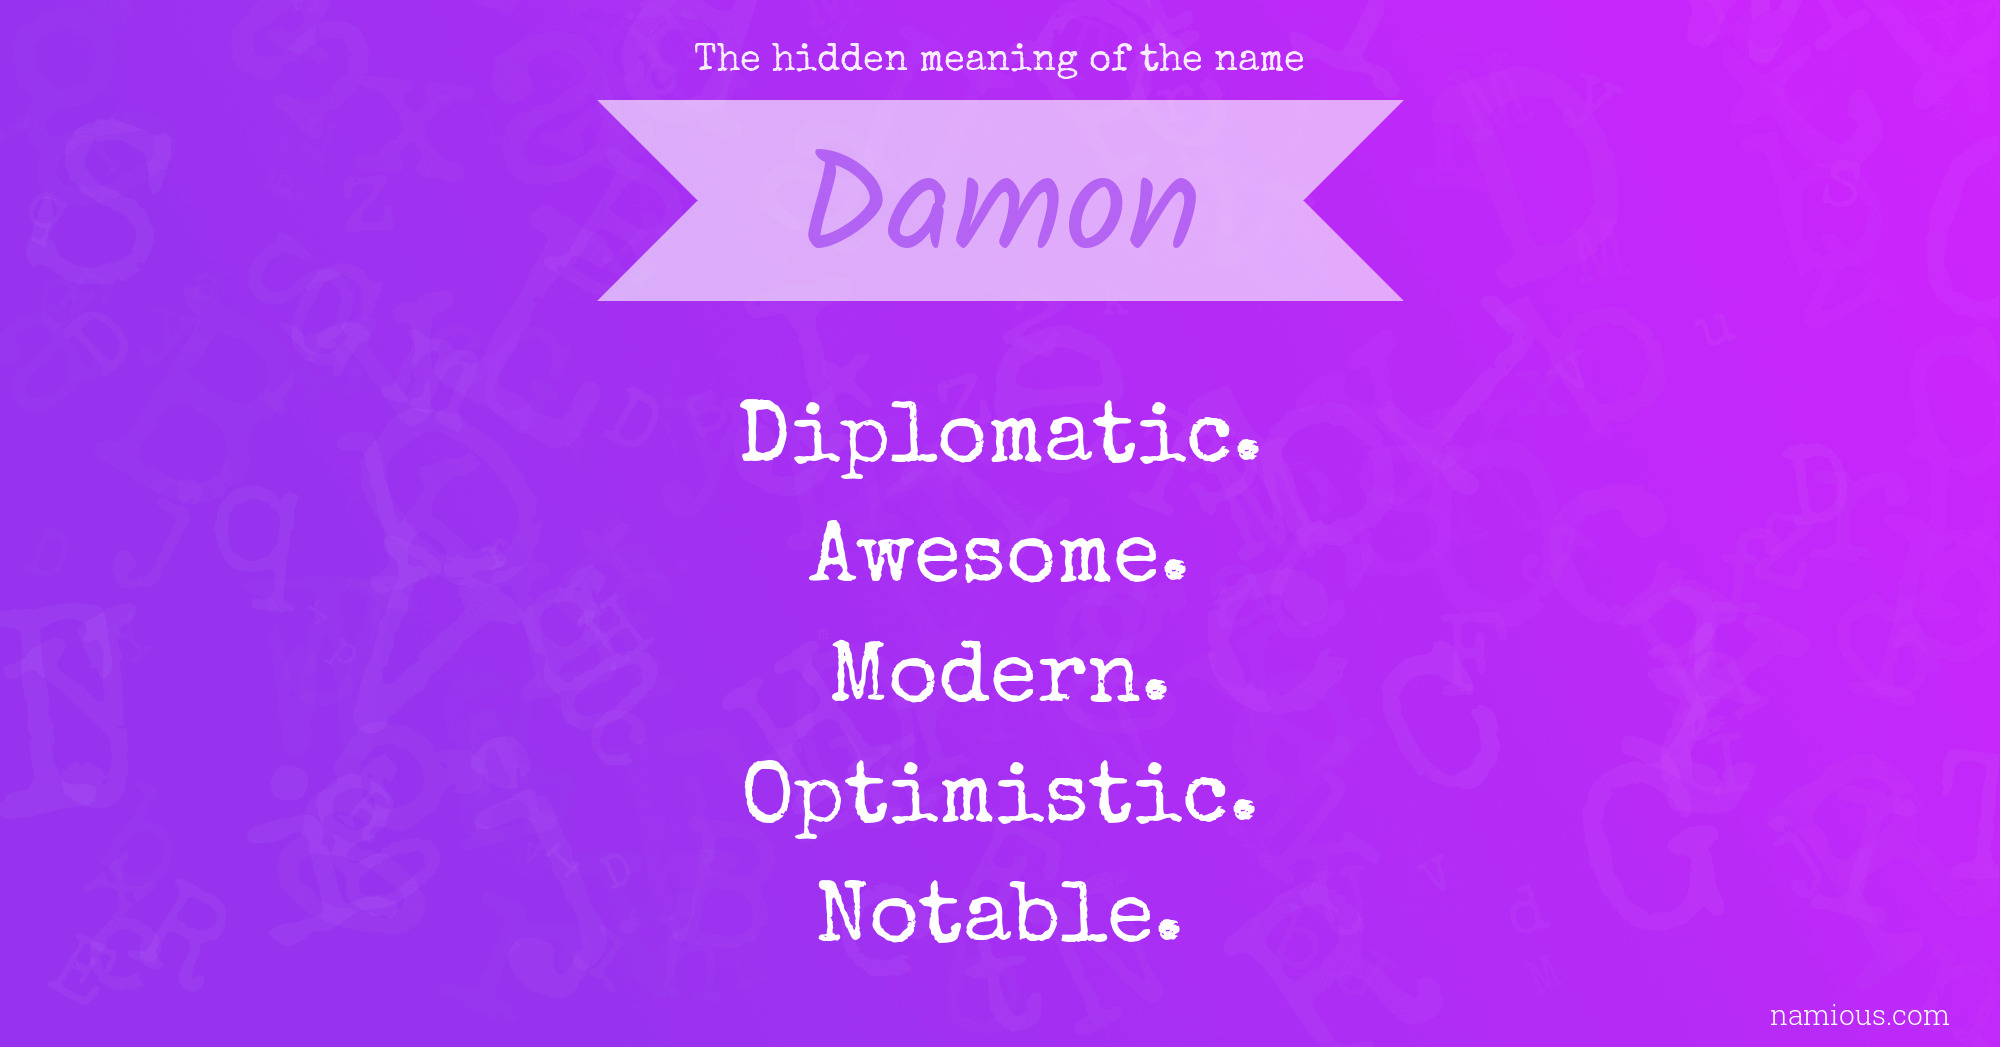 The hidden meaning of the name Damon